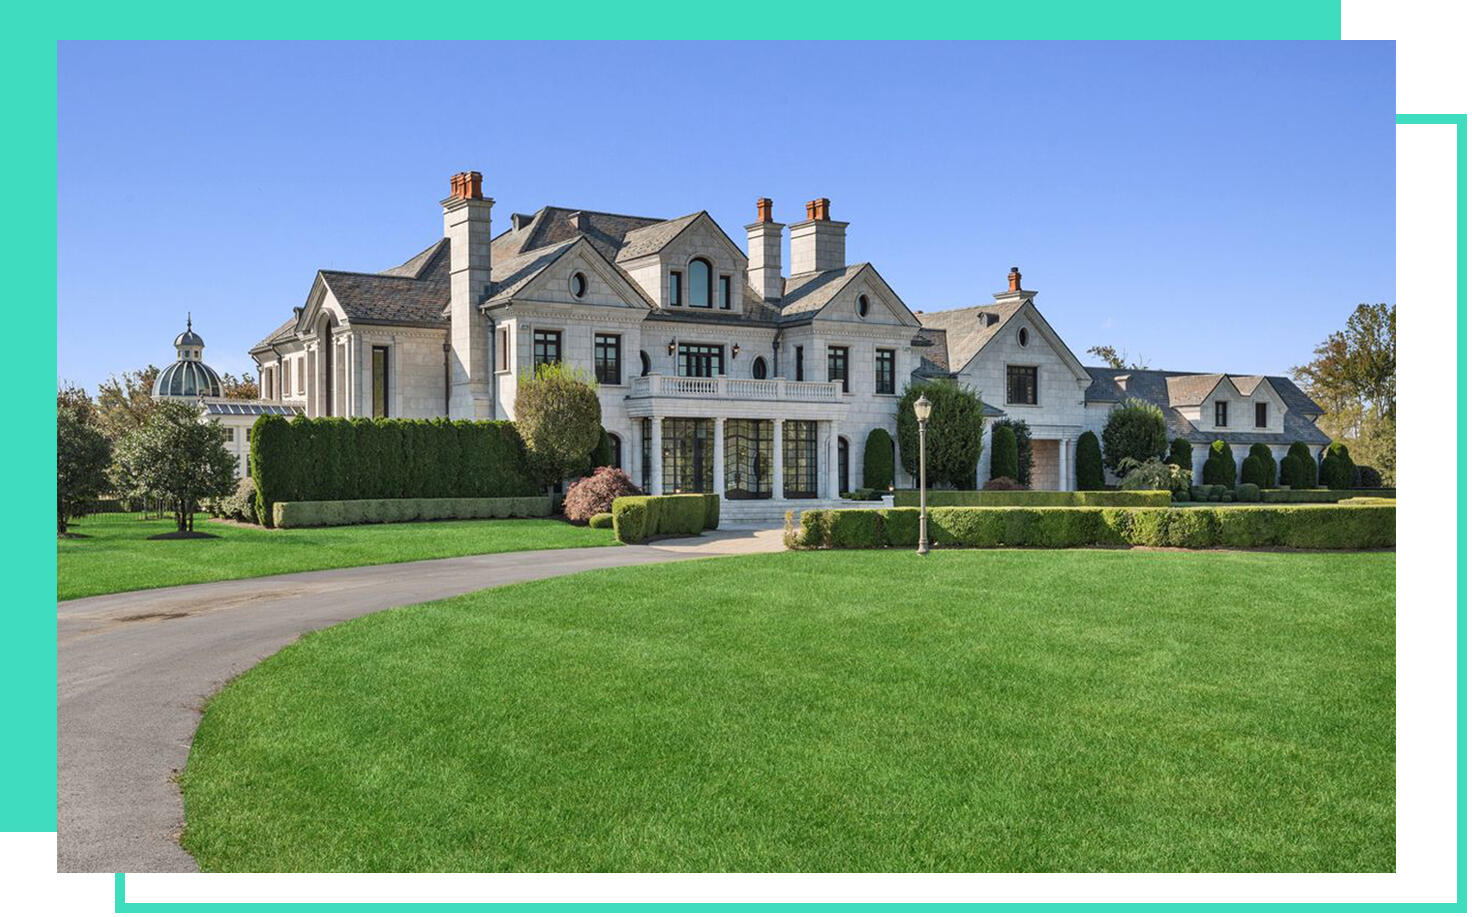 A 160-Acre Estate In Colts Neck, New Jersey Listing For $28.9M